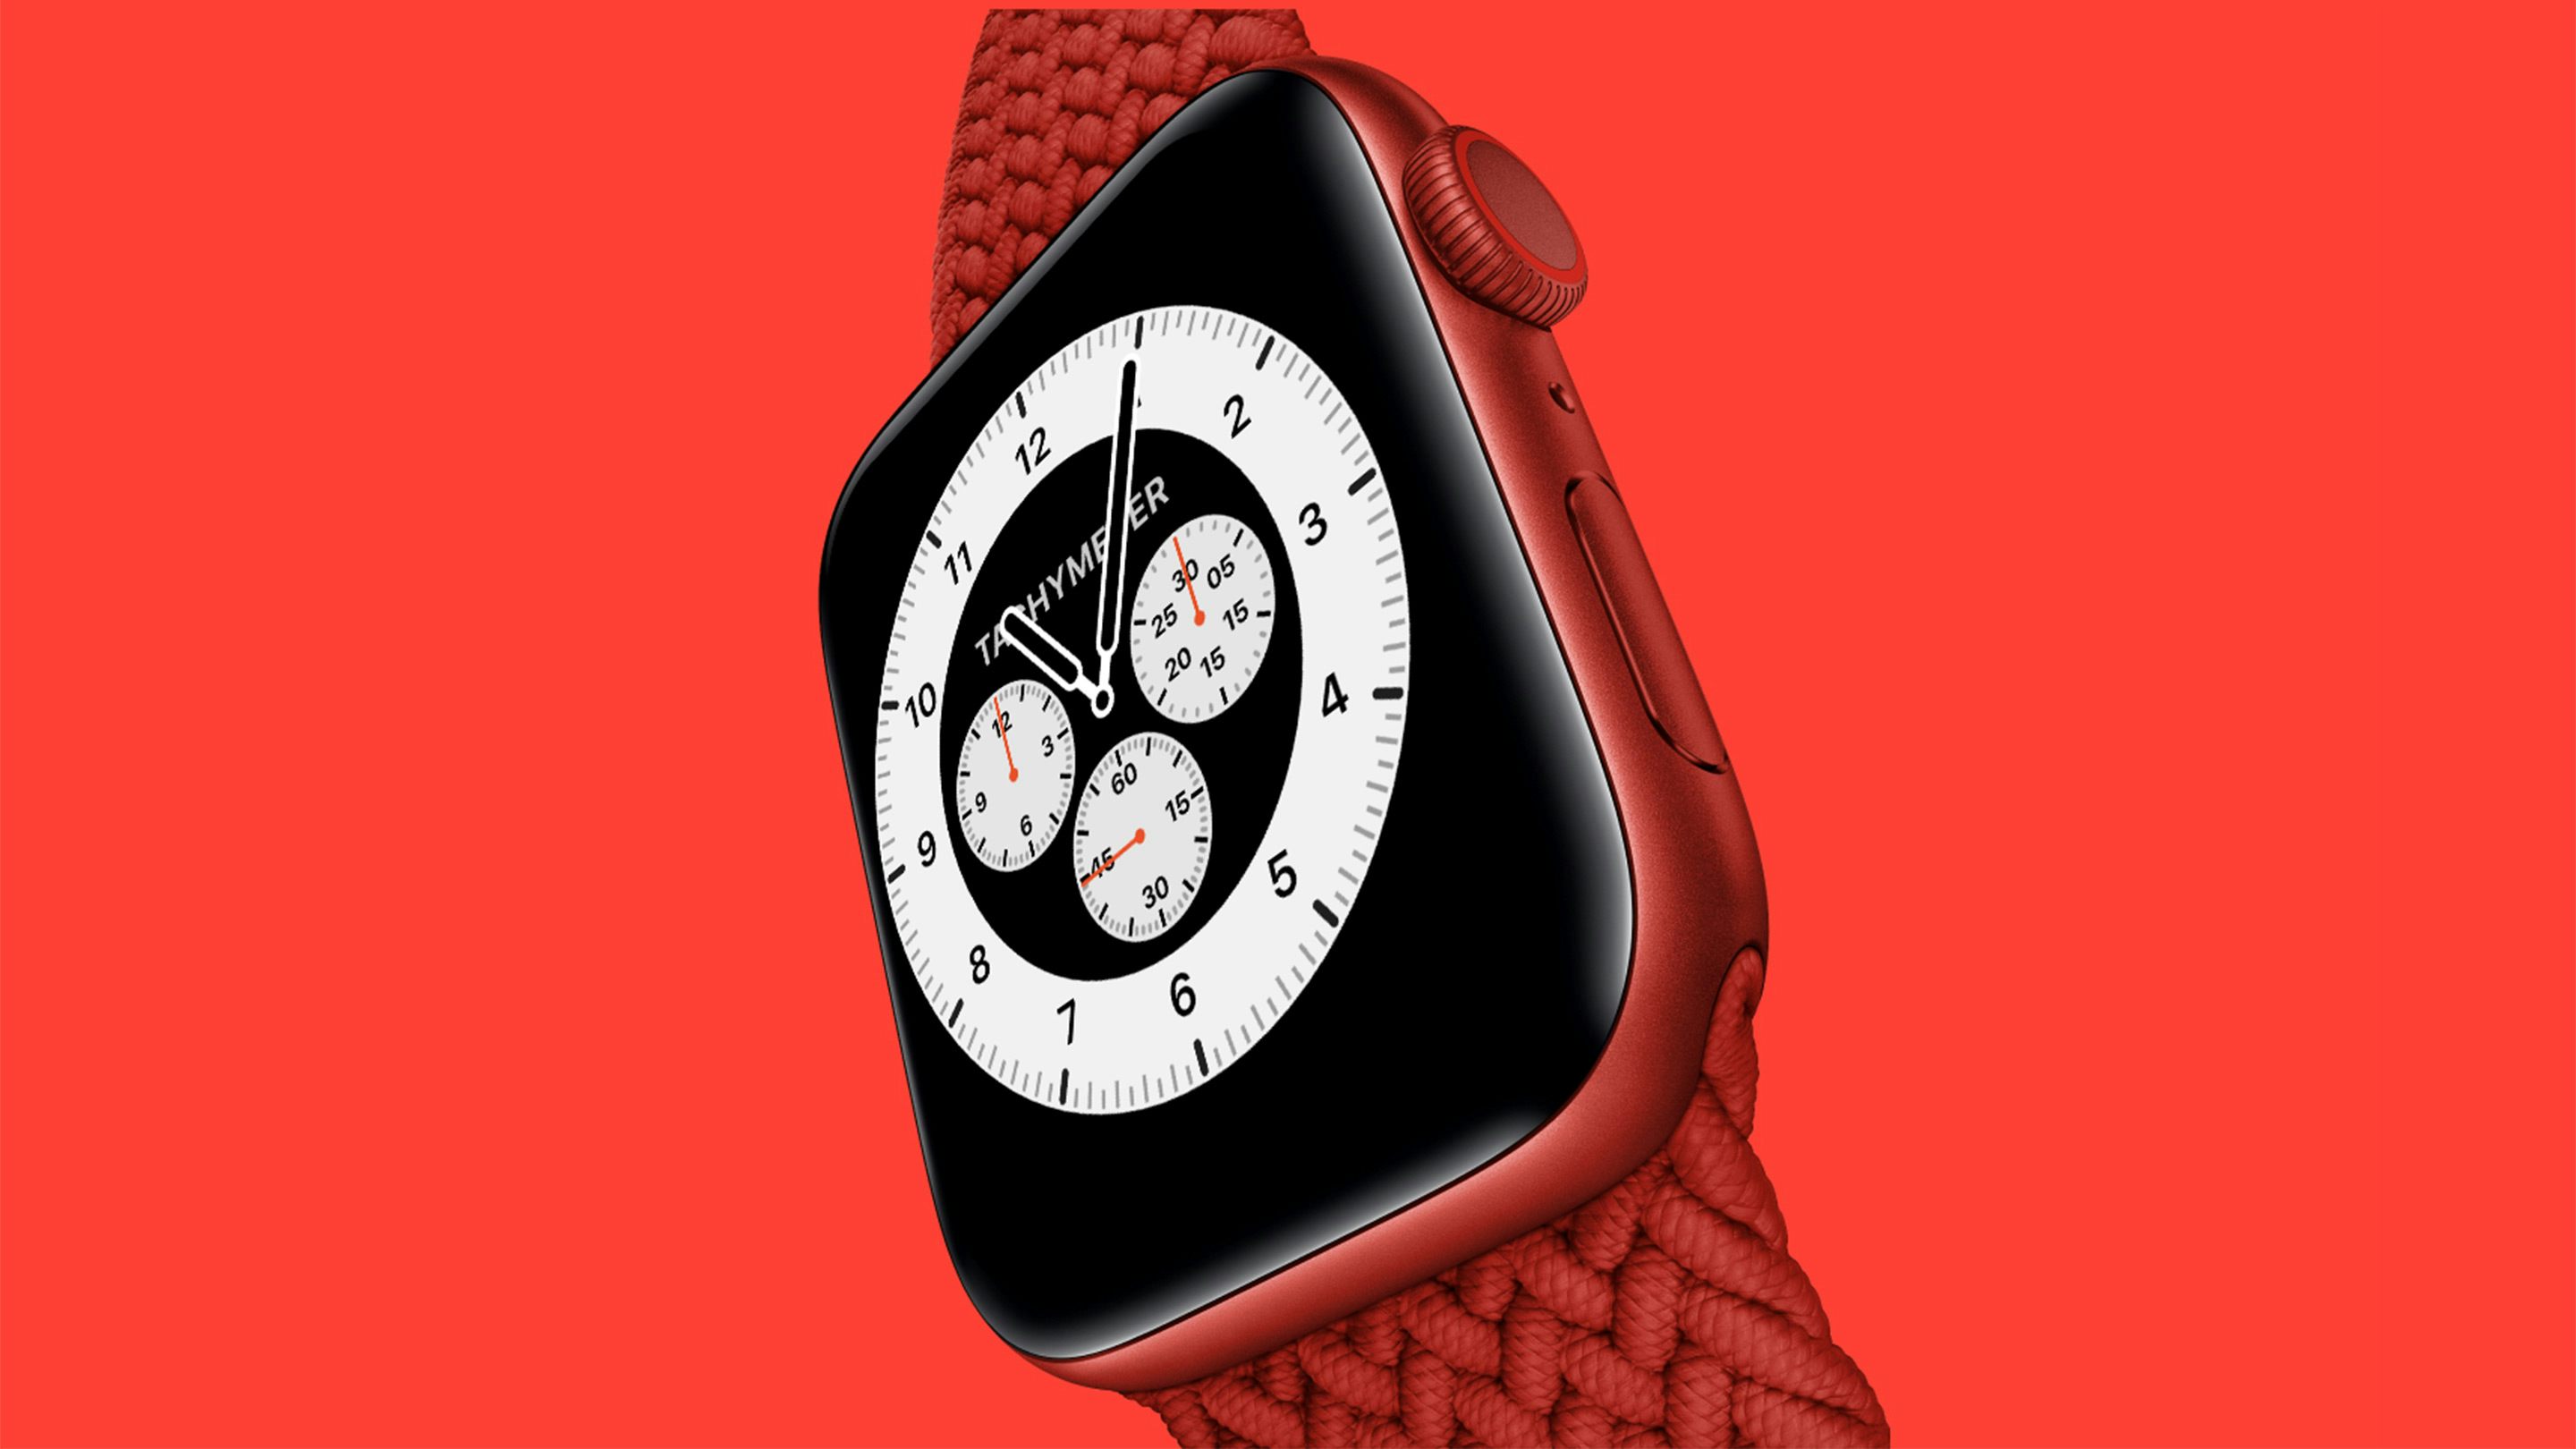 Recommended Reading: The Iconic Watches That Inspired Apple Watch